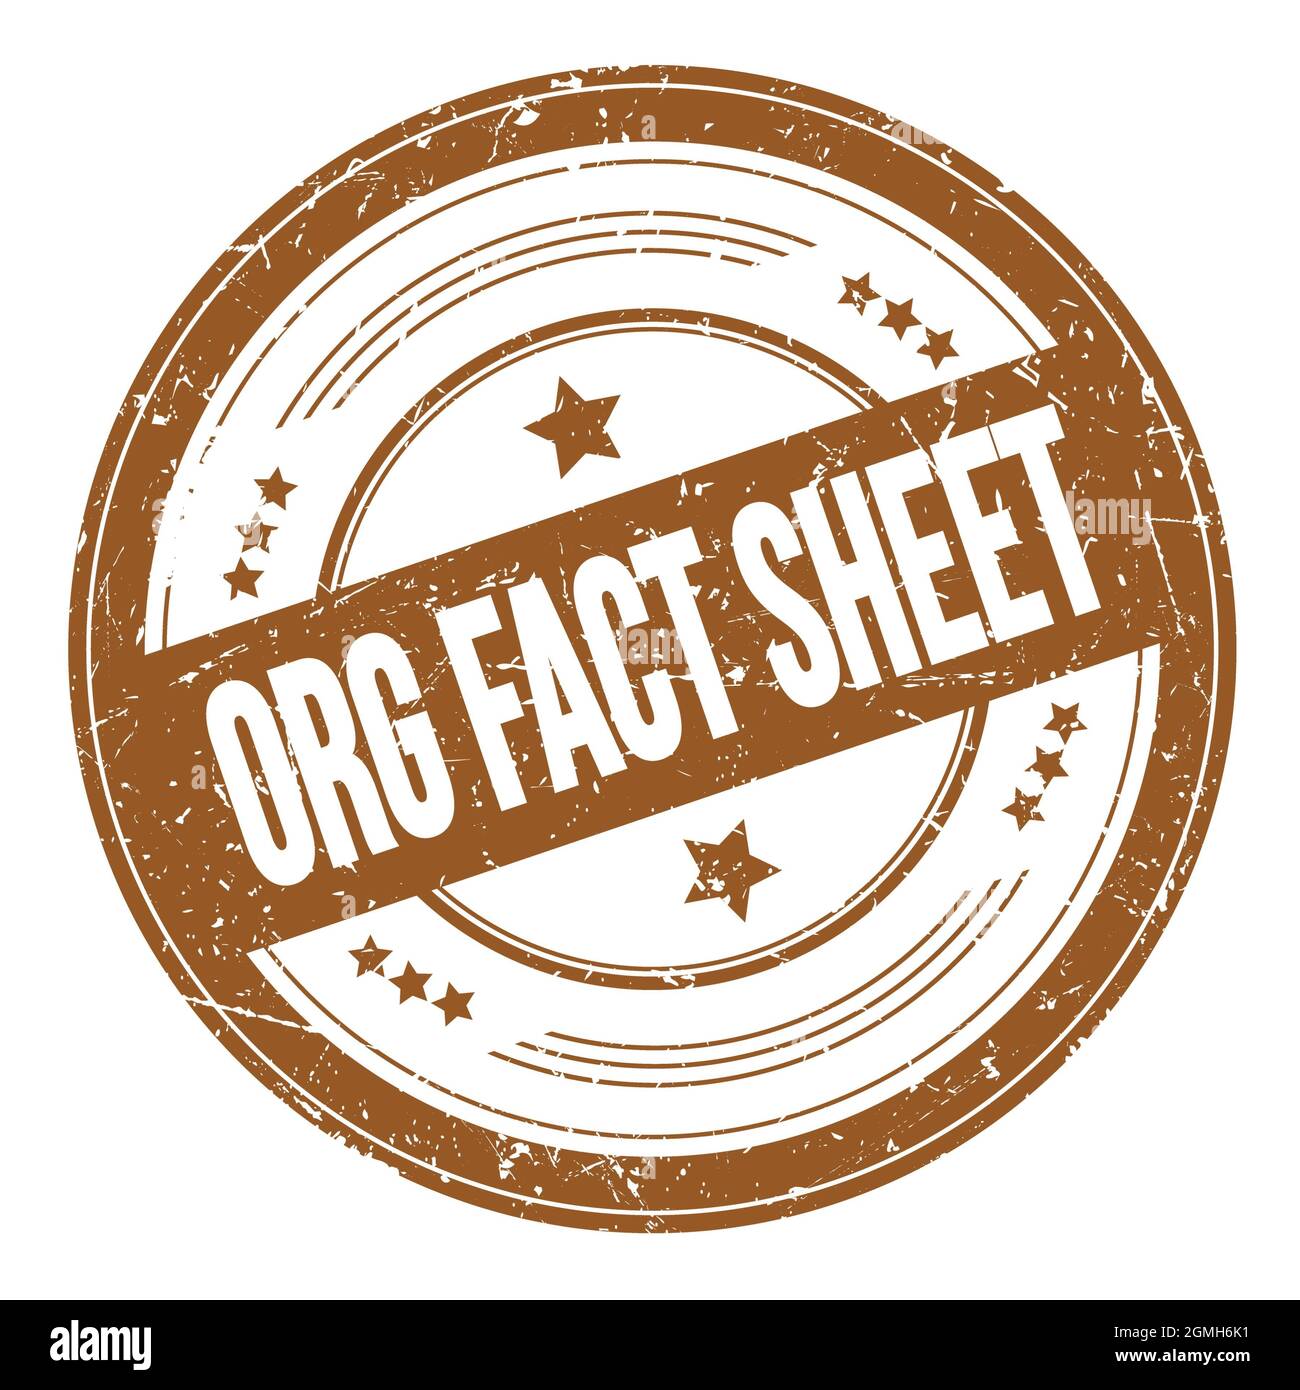 ORG FACT SHEET text on brown round grungy texture stamp. Stock Photo